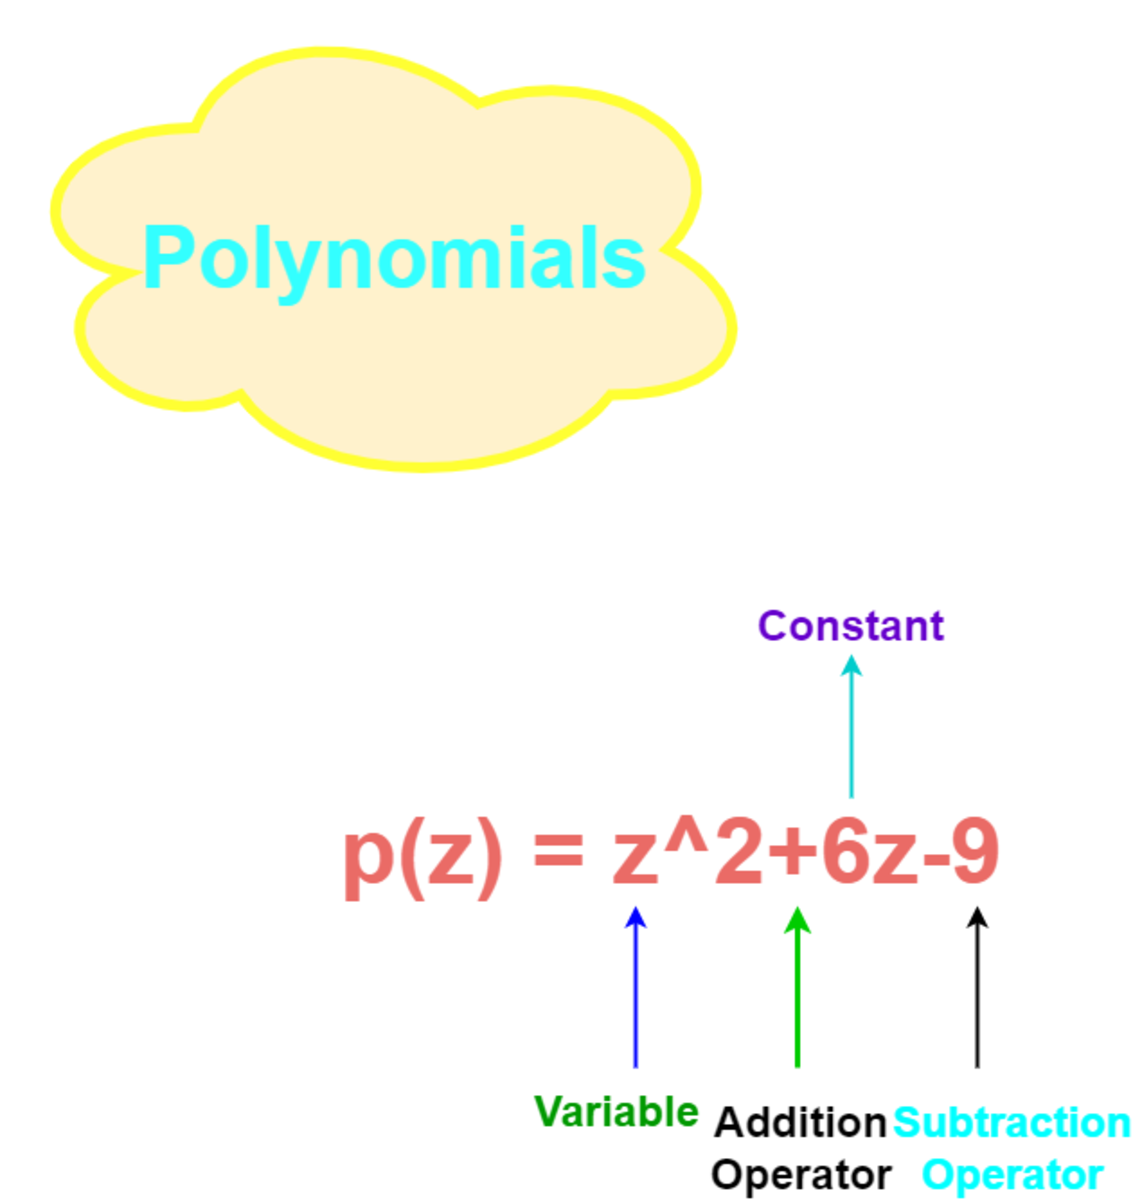 Polynomials (Definition, Types and Examples)